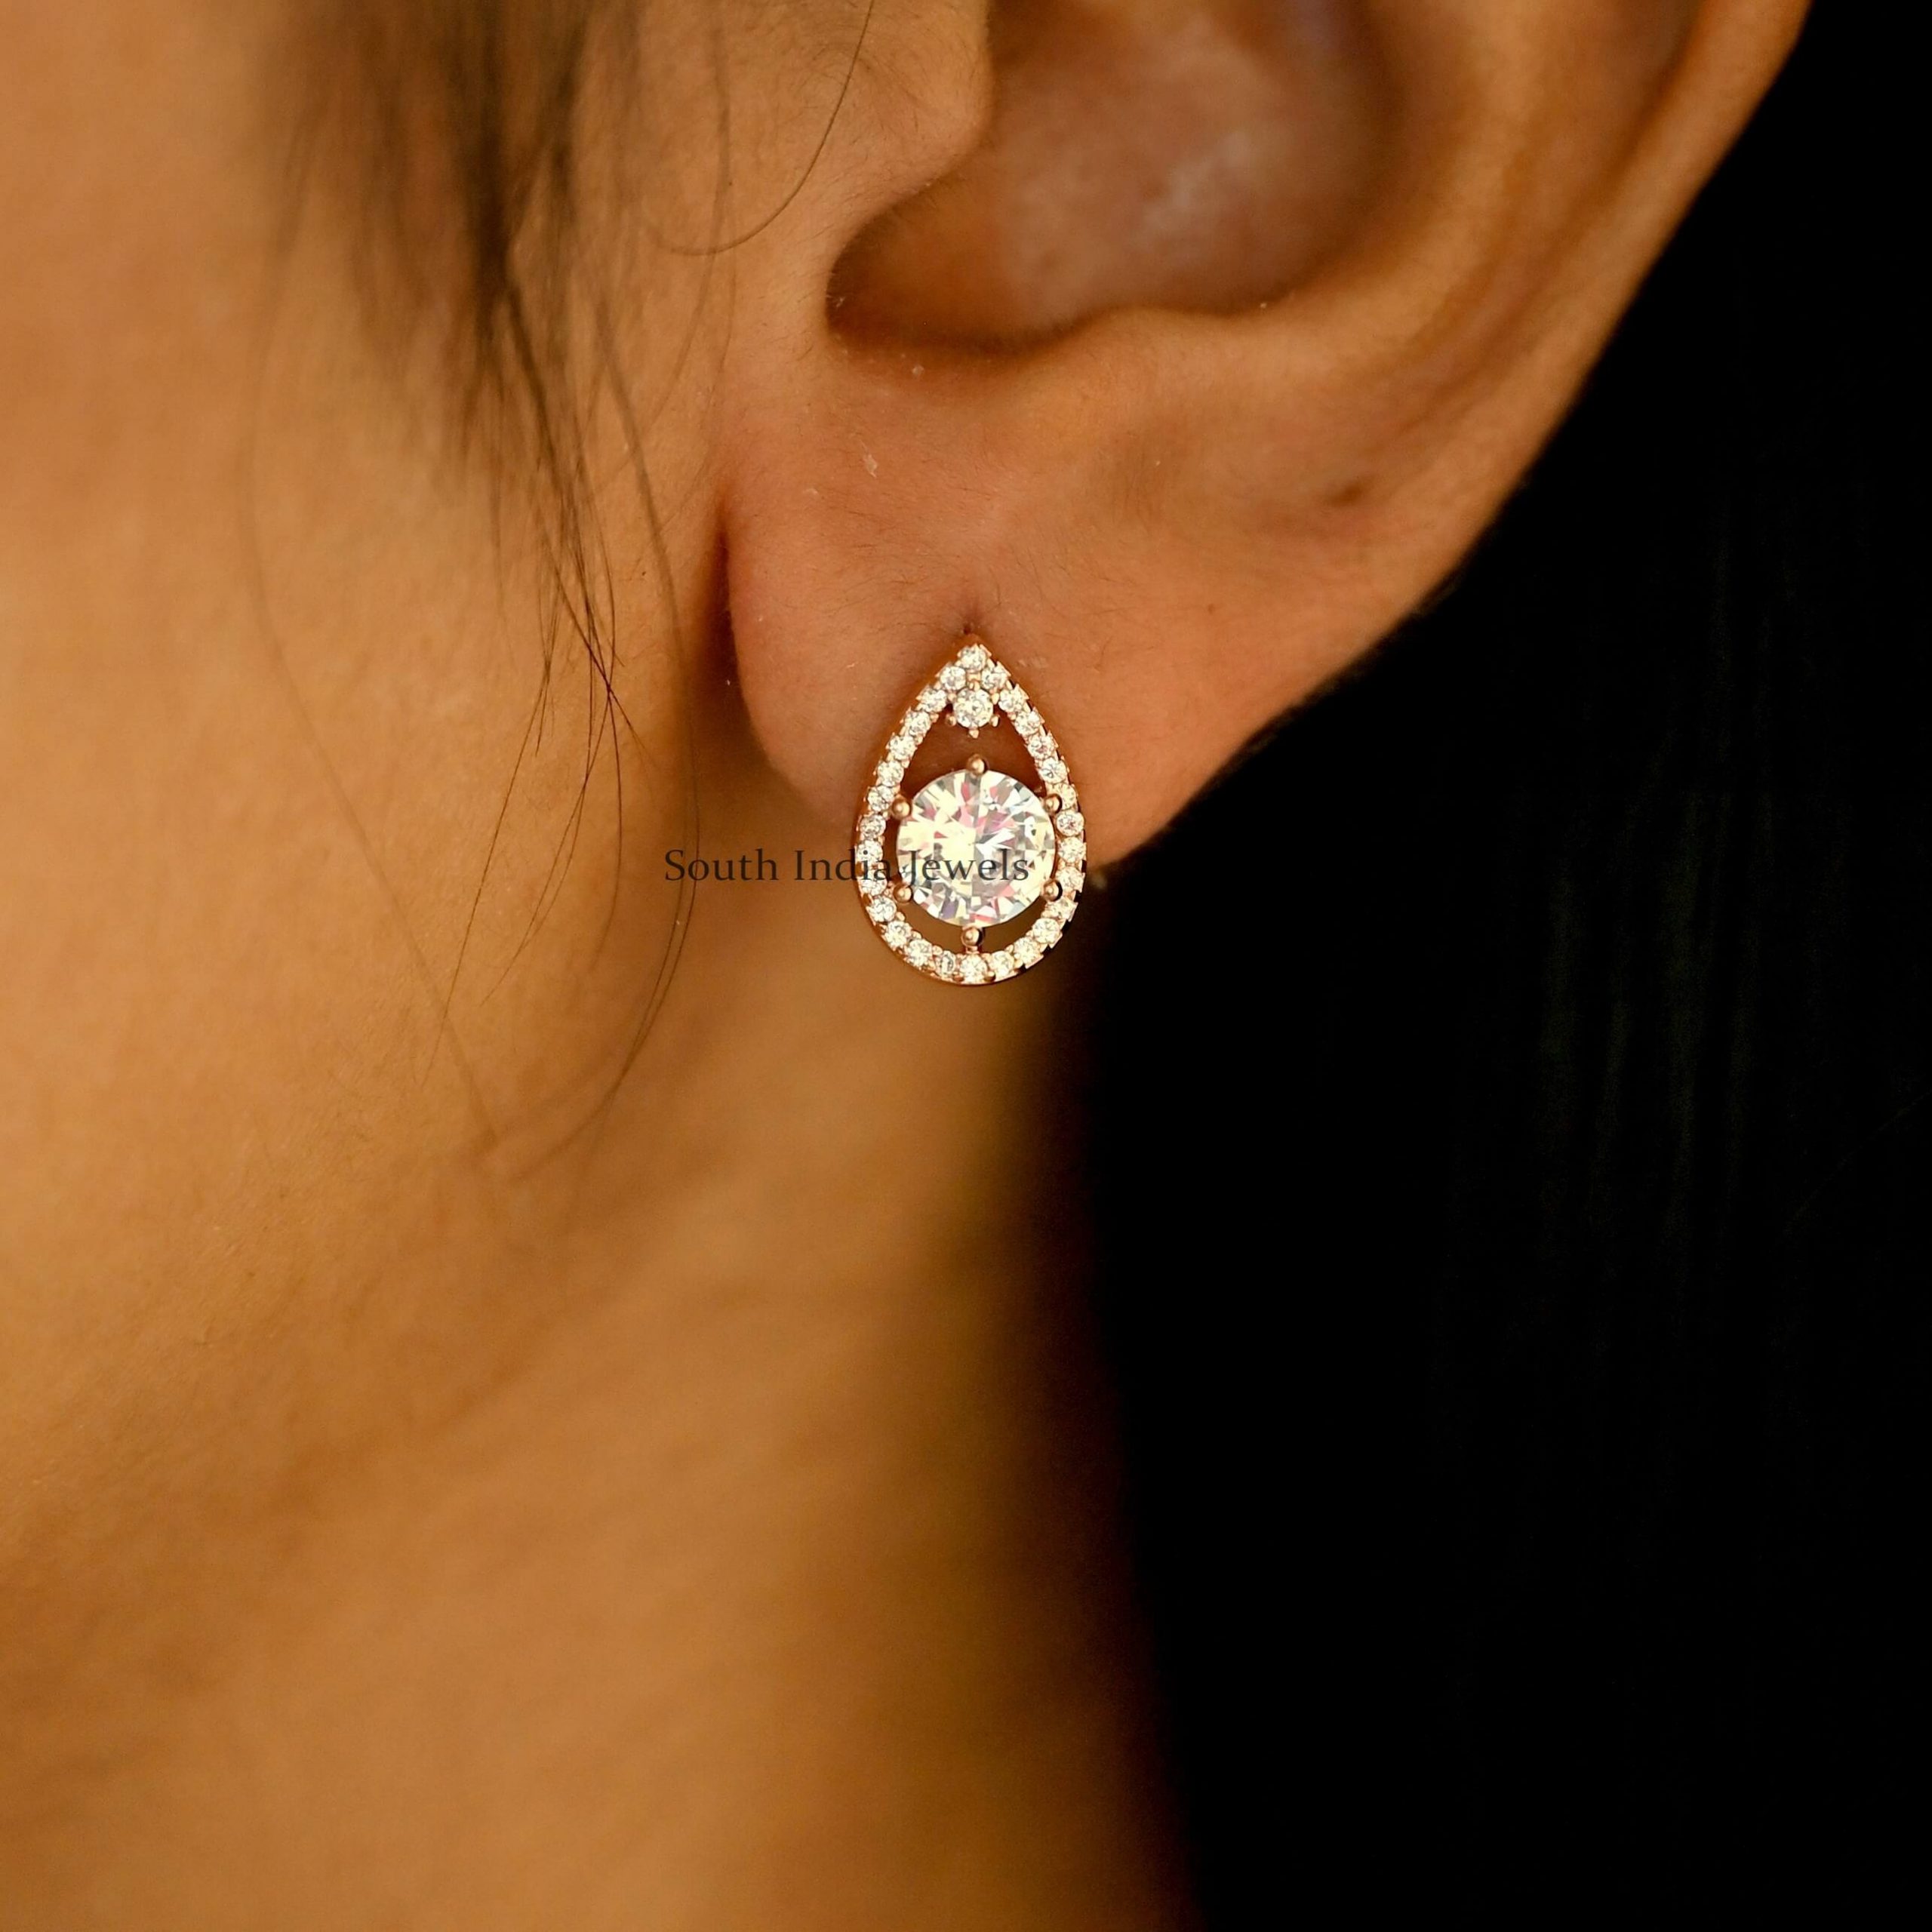 Buy Simple Gold Earring Design First Quality CZ Stone Earring Buy Online